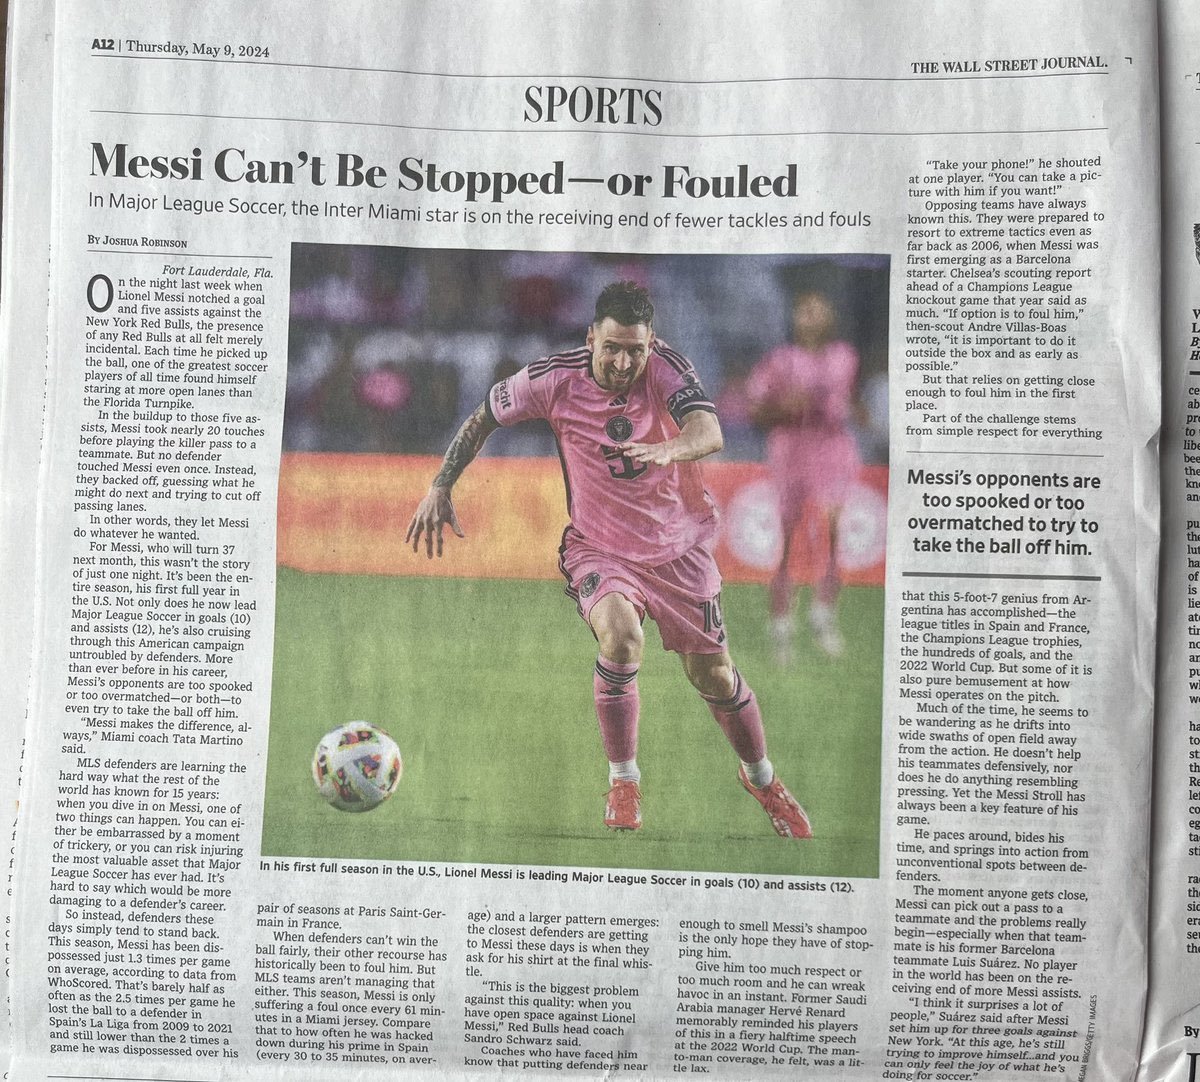 🚨 The “Wall Street Journal”, publishes an article about Messi: 

What are they trying to imply here?